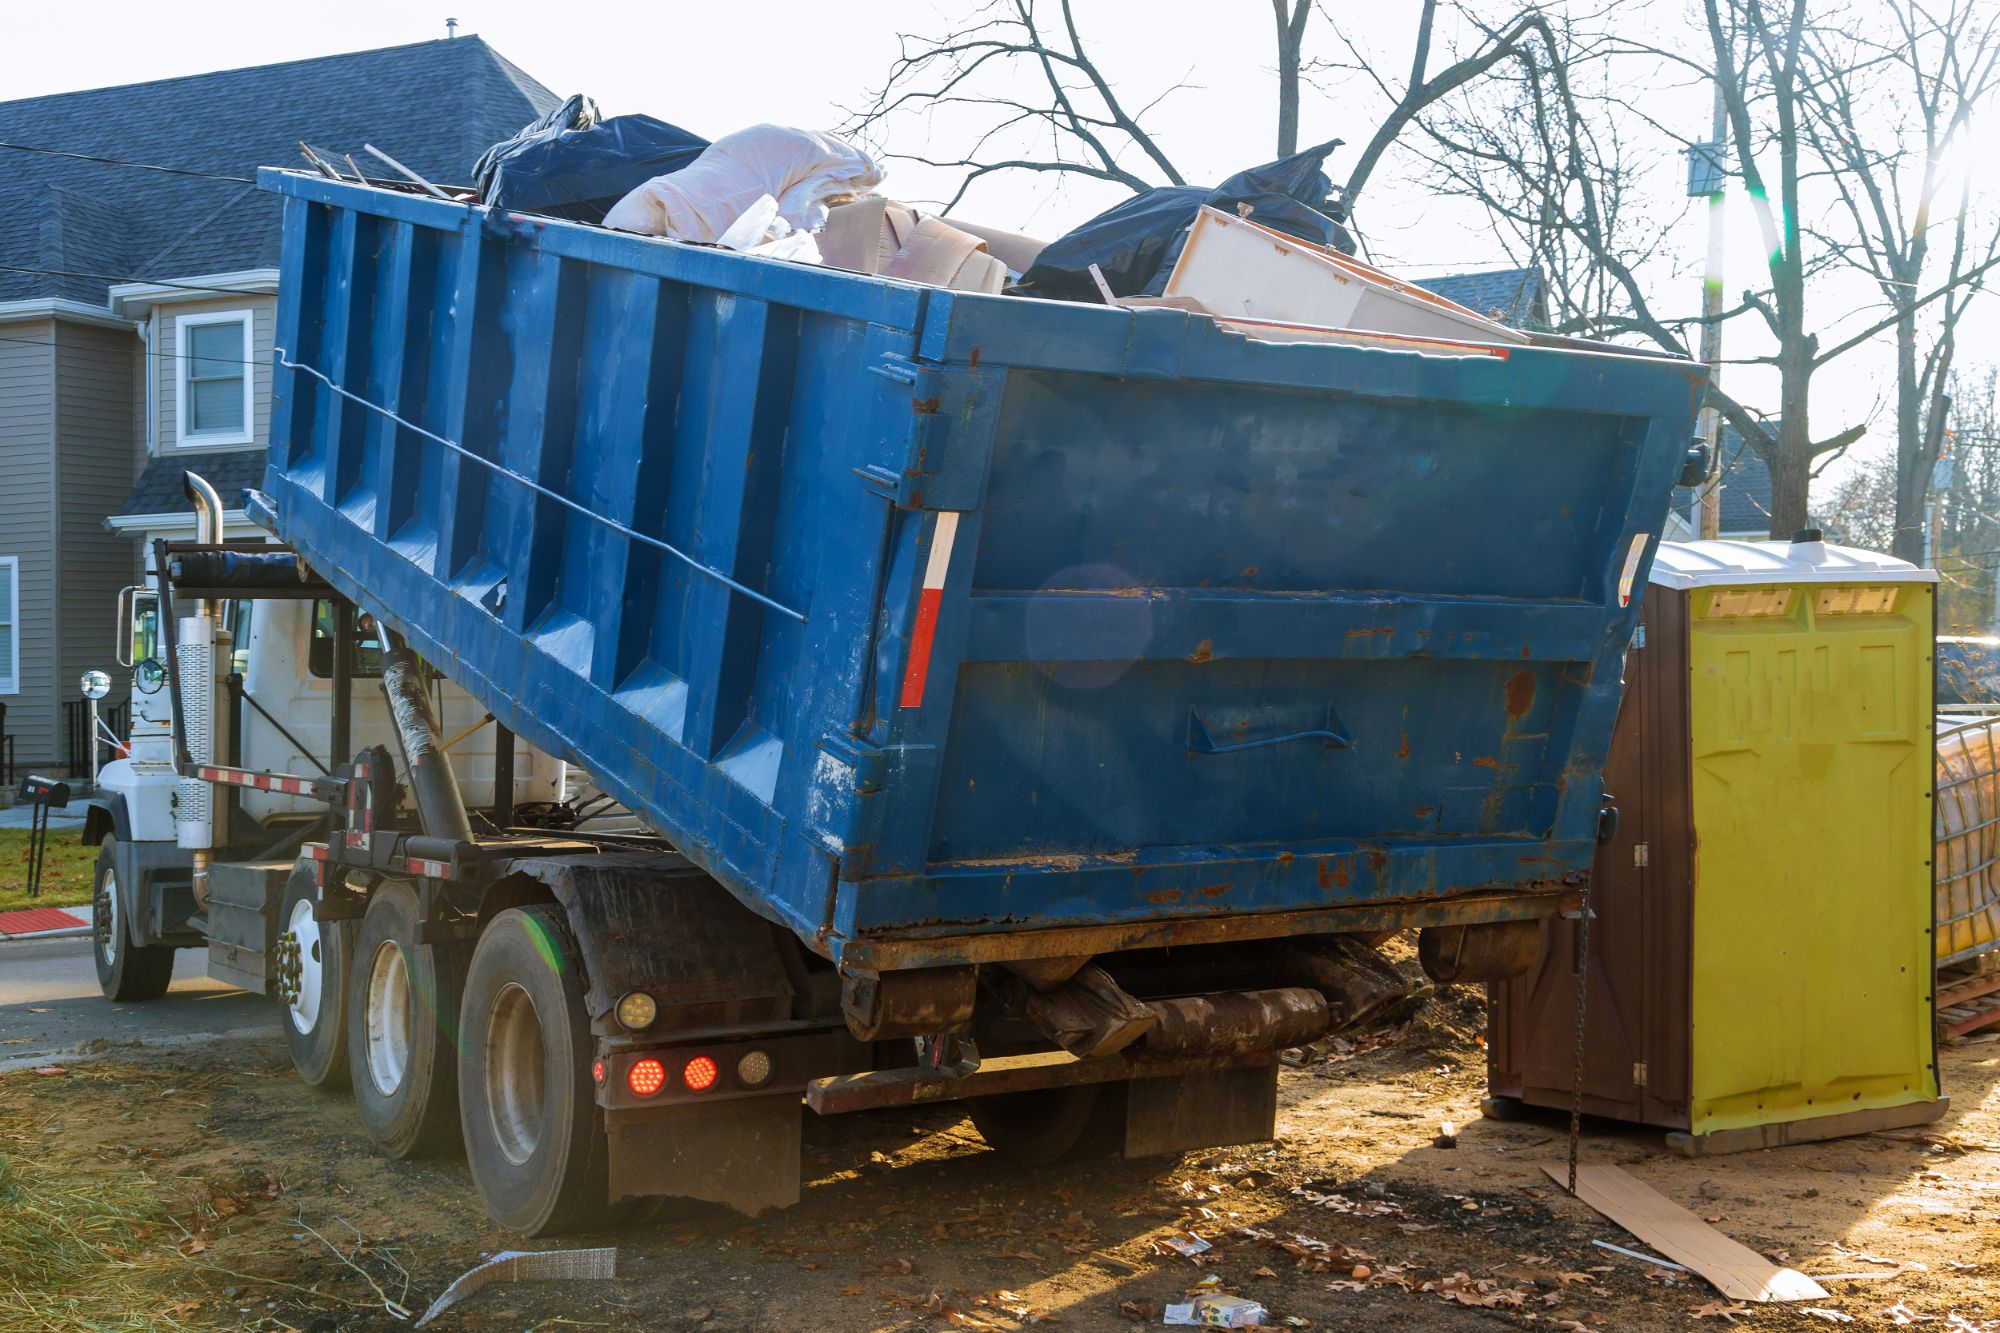 ACR Dumpsters providing reliable dumpster rental service in Clinton County, Michigan.